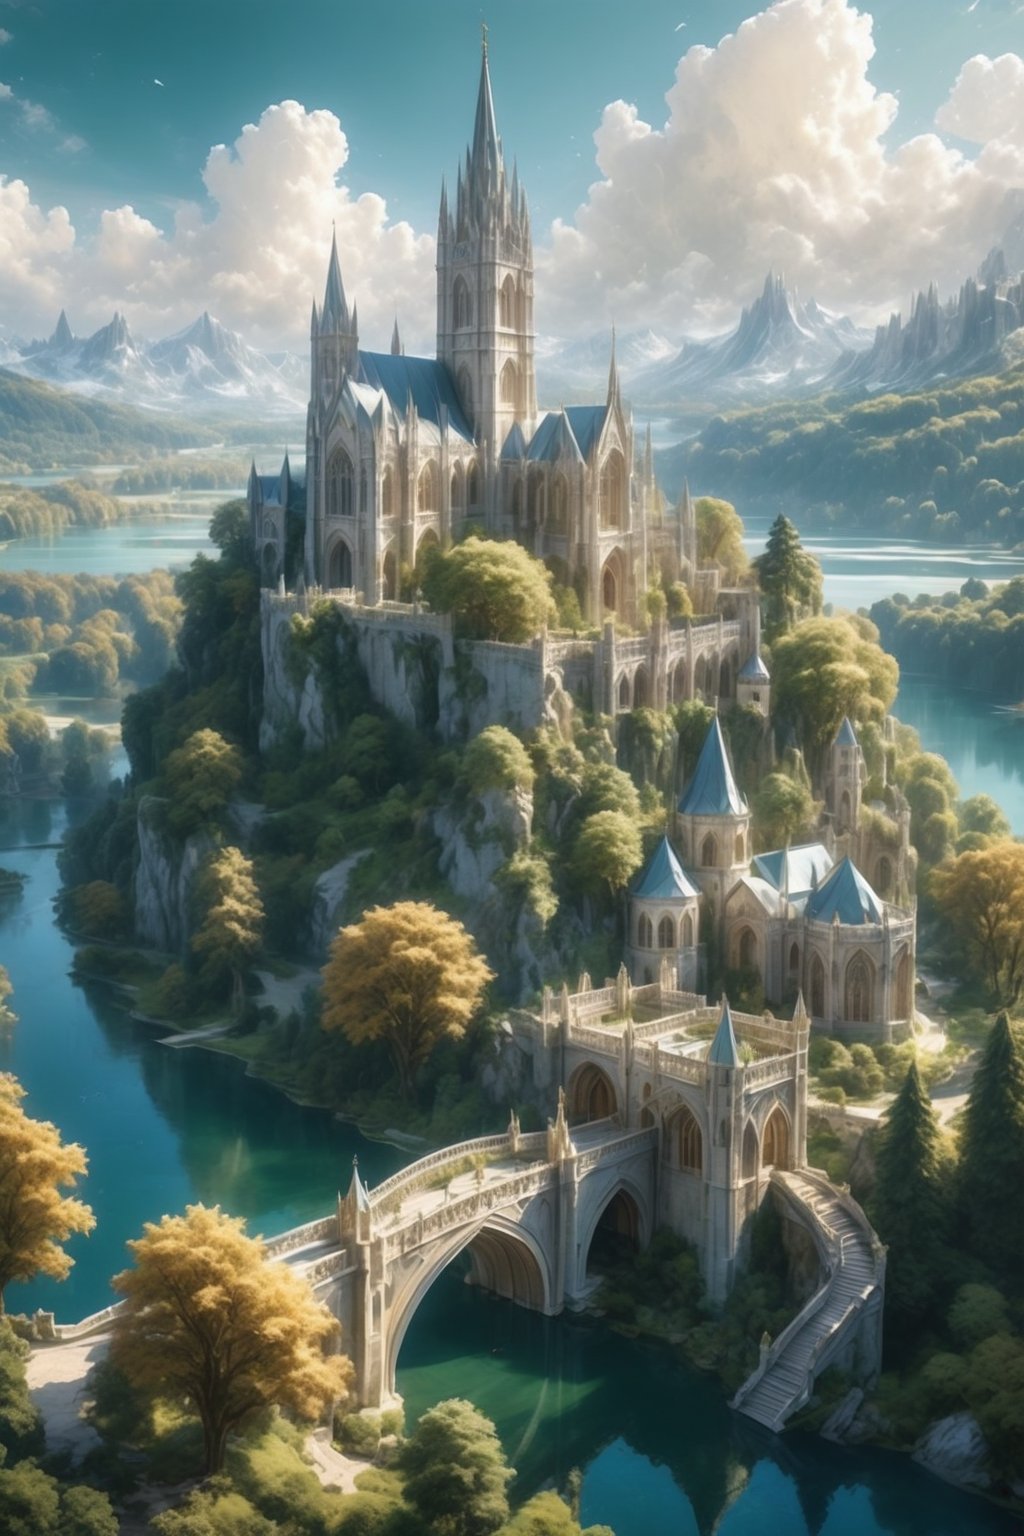 A majestic aerial view of a fantasy world, where two Elven marble castles stand majestically on a cliff, connected by arched bridges that stretch across the crystal-clear waters of a serene lake. The surrounding landscape is dotted with towering white trees, their delicate branches swaying gently in the breeze. A mountain range stretches out to the horizon, its peaks shrouded in misty clouds. In the distance, a magnificent cathedral and tower rise from the city's heart, bathed in warm sunlight that casts a golden glow on the lush greenery below.